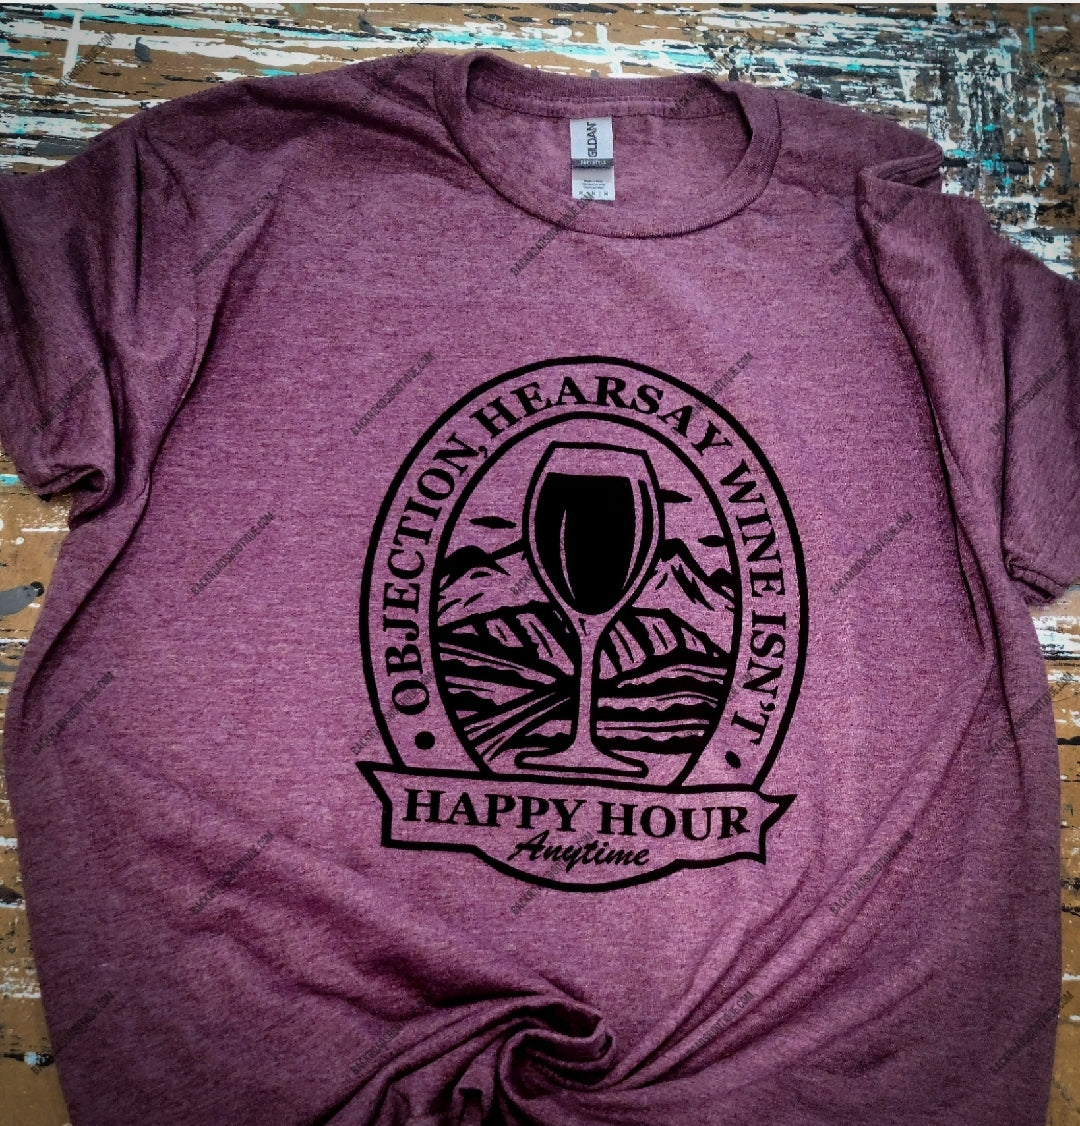 Objection Hearsay Happy Hour Anytime Screen Print Transfer - 10 x 8 Inches